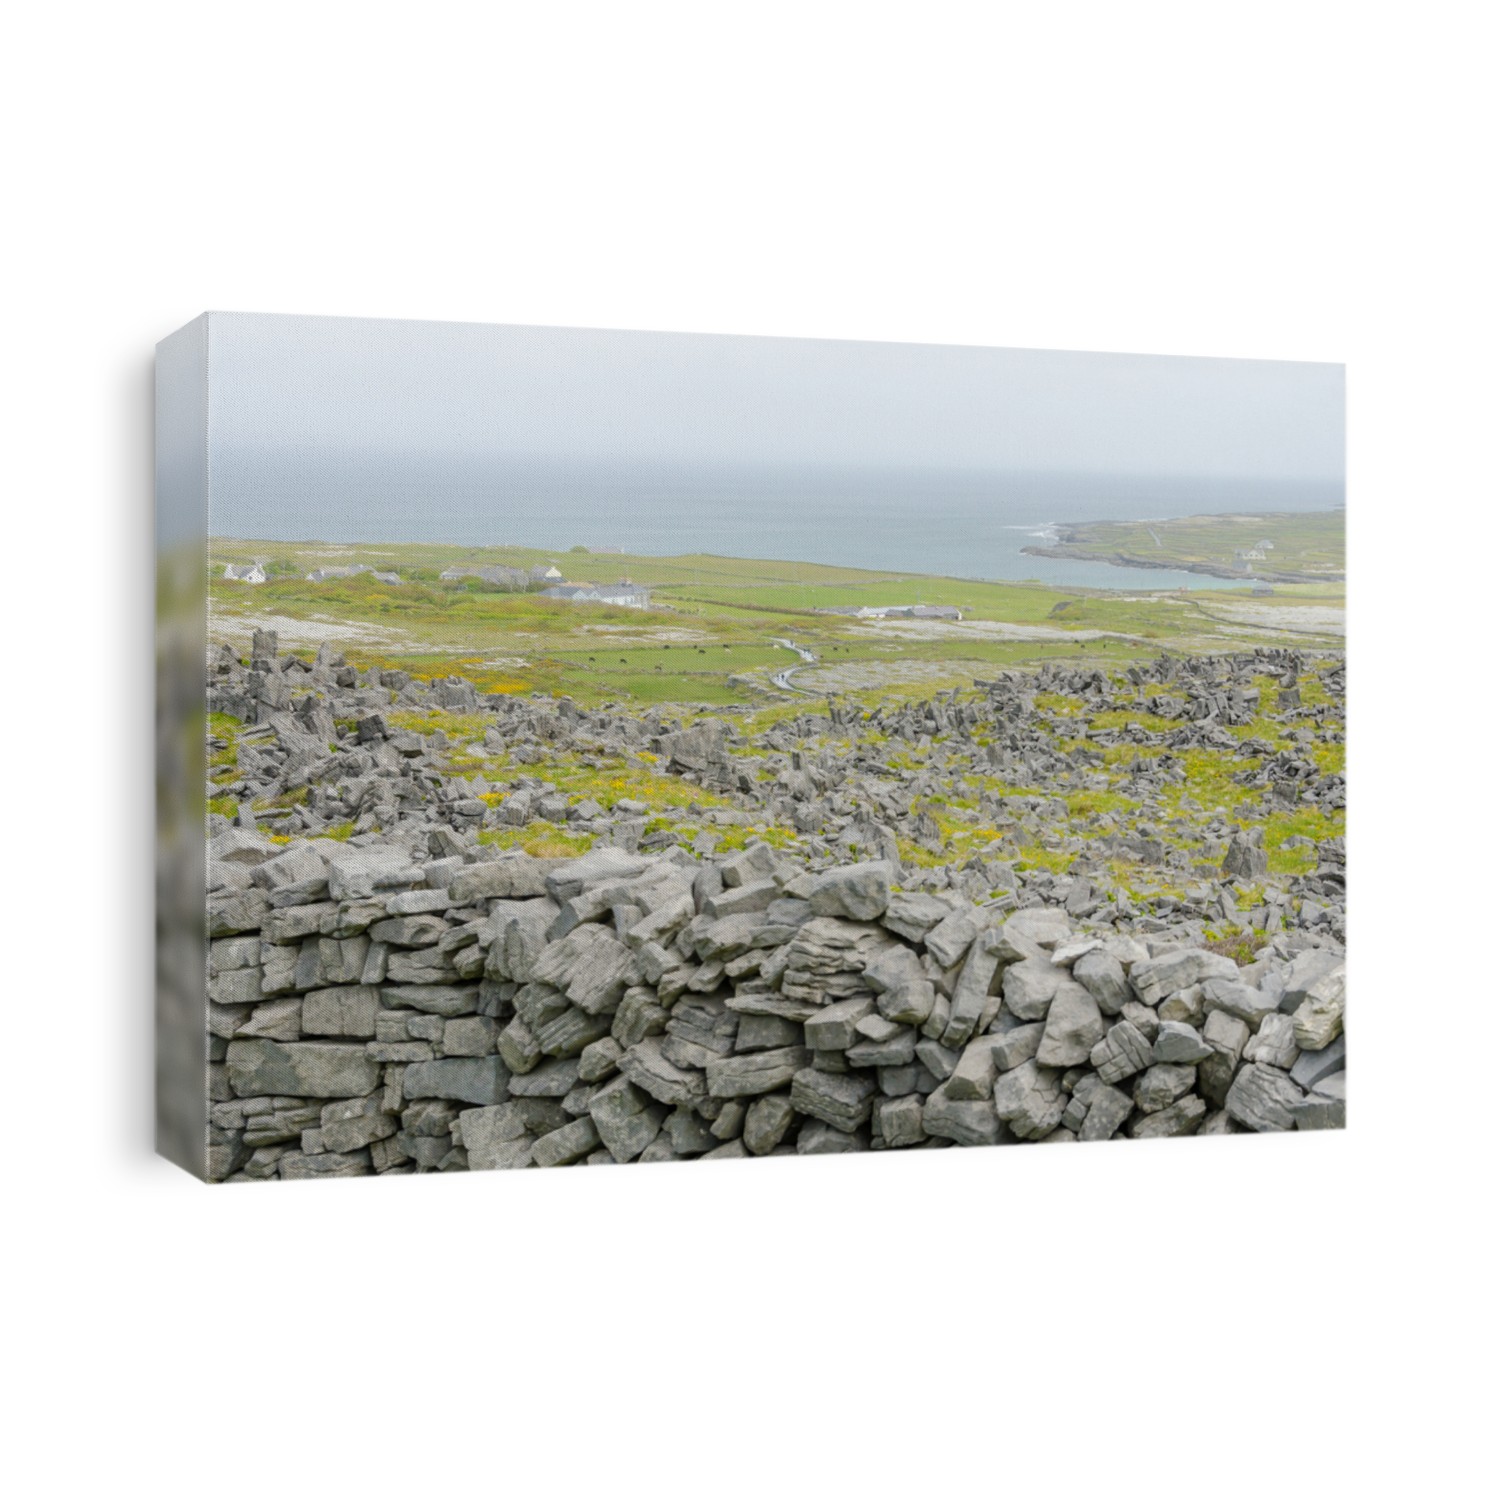 Irish landscape - view from Dun Aengus, an ancient fort.